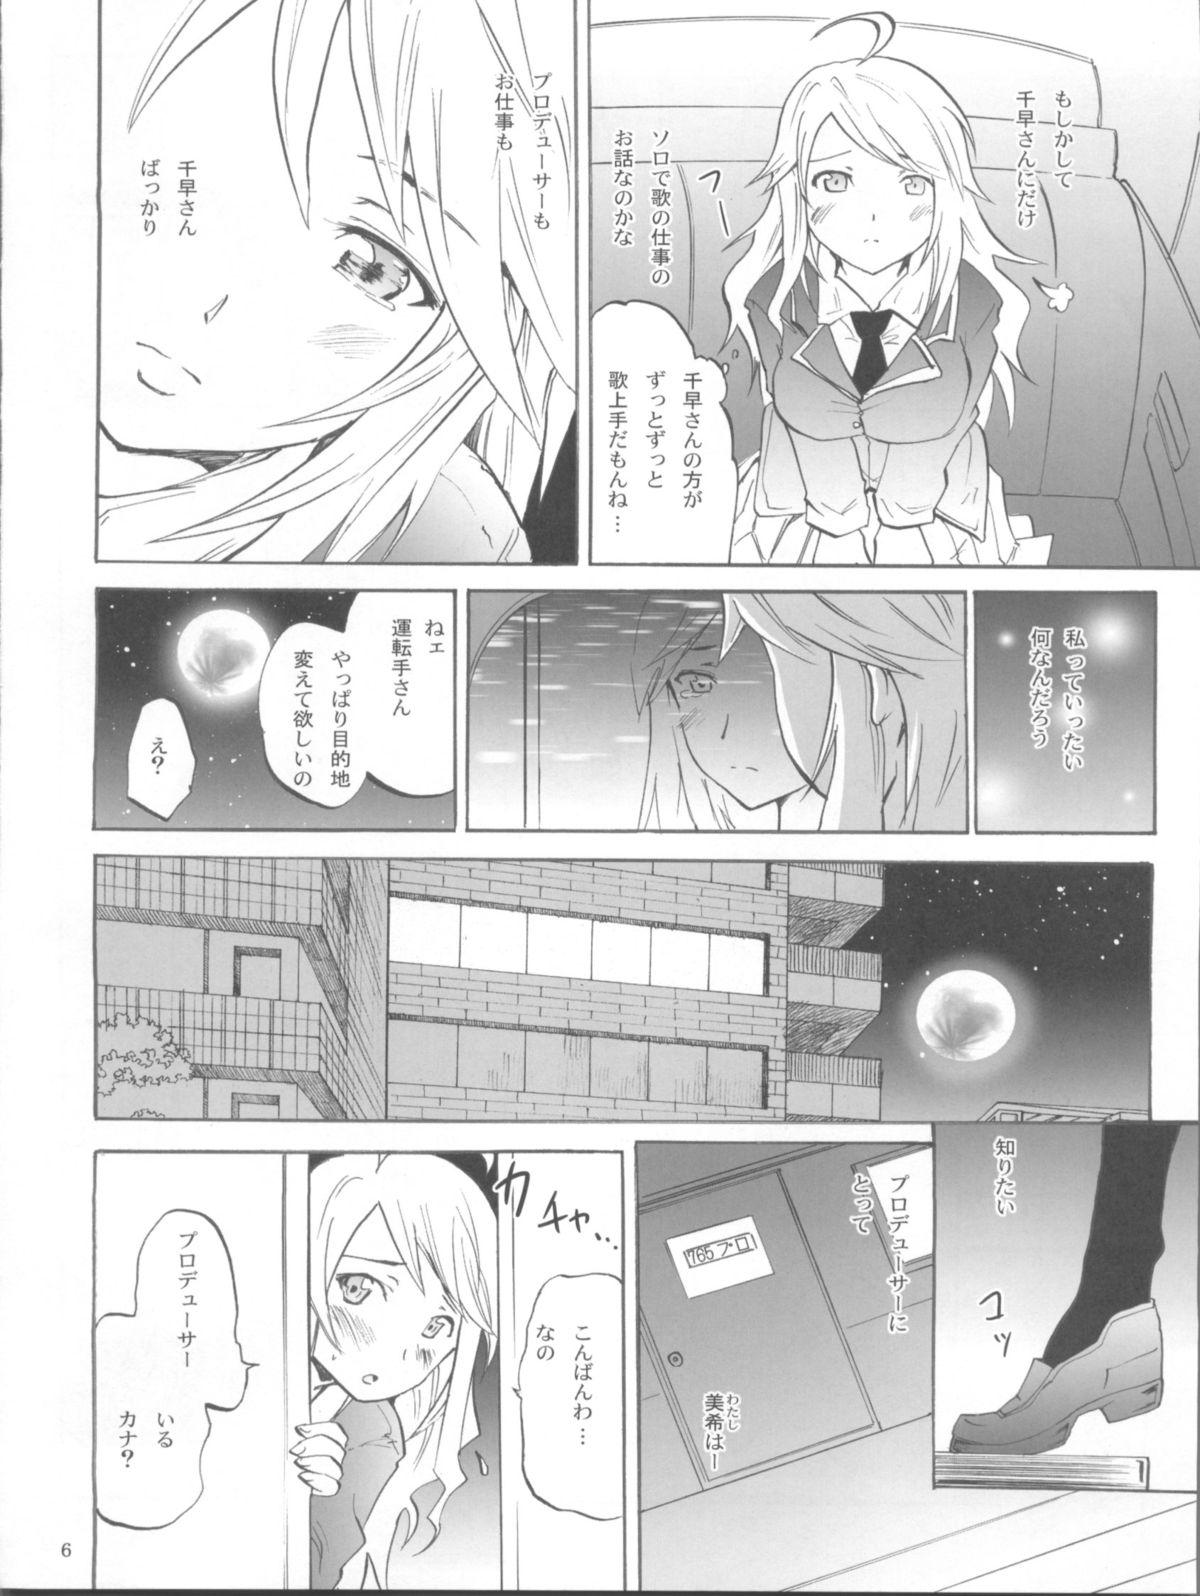 Vintage Relaise 2 - The idolmaster Cougars - Page 6